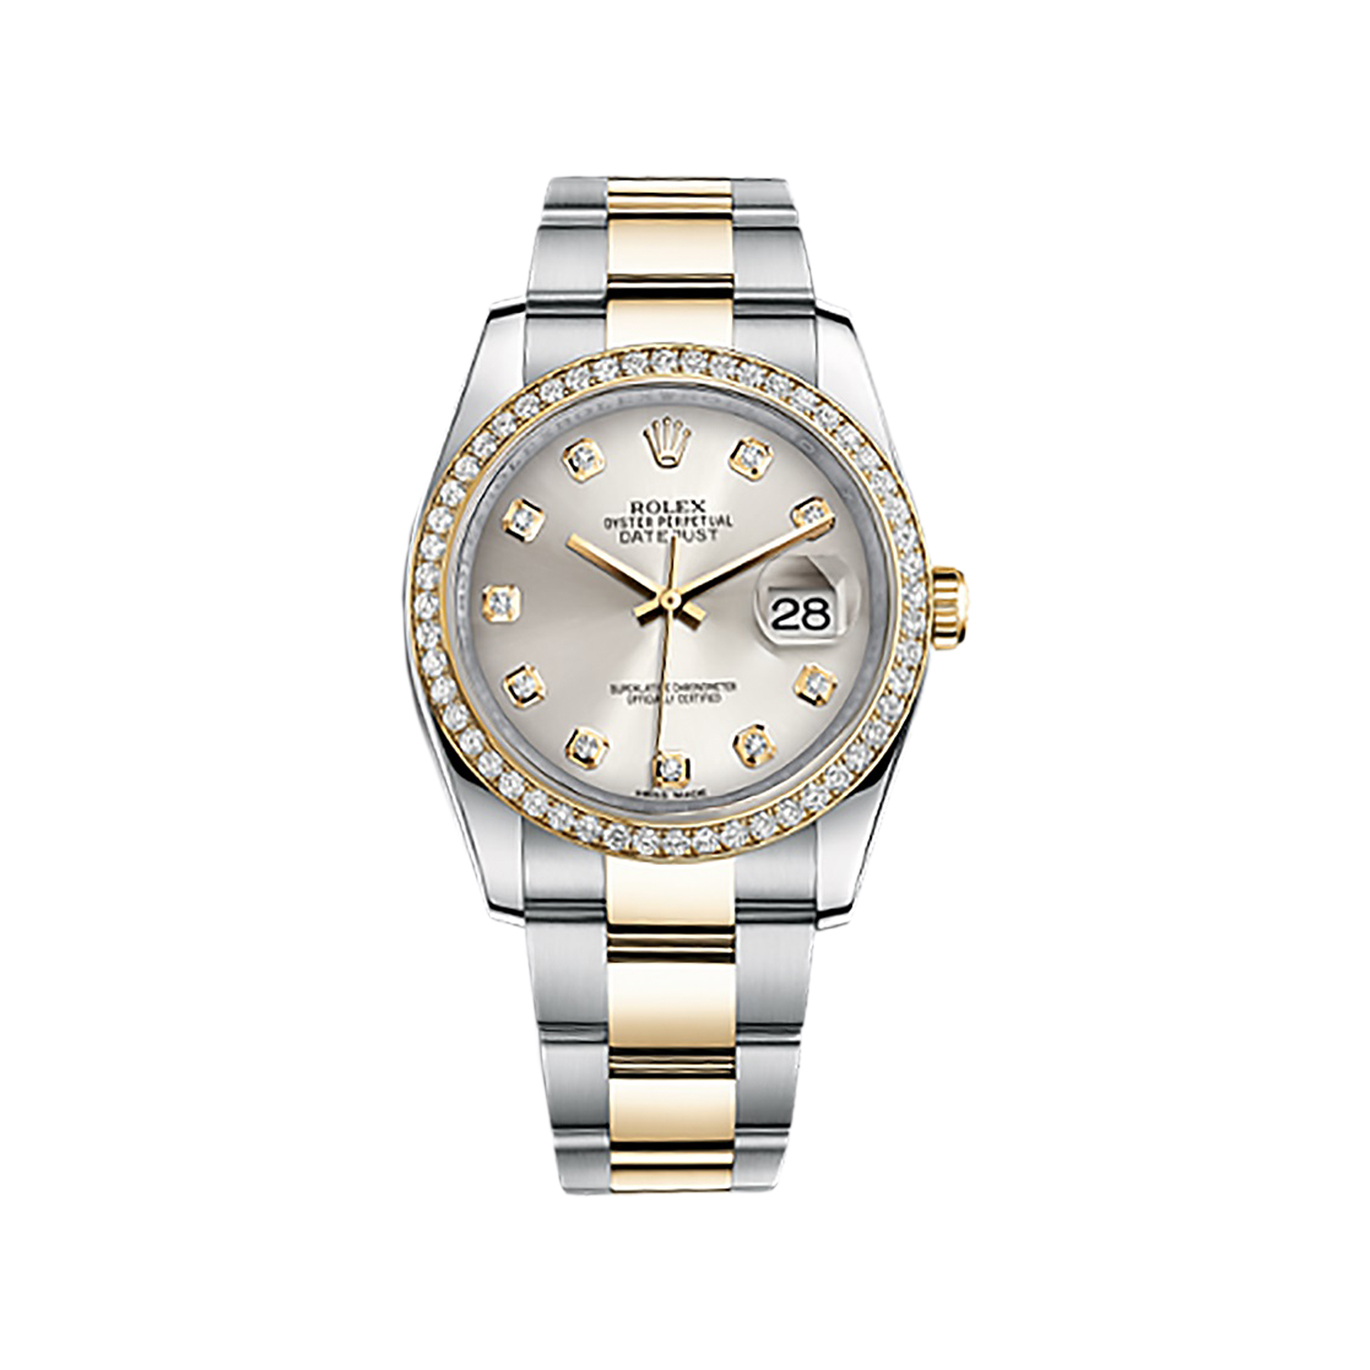 Datejust 36 116243 Gold & Stainless Steel Watch (Silver Set with Diamonds)